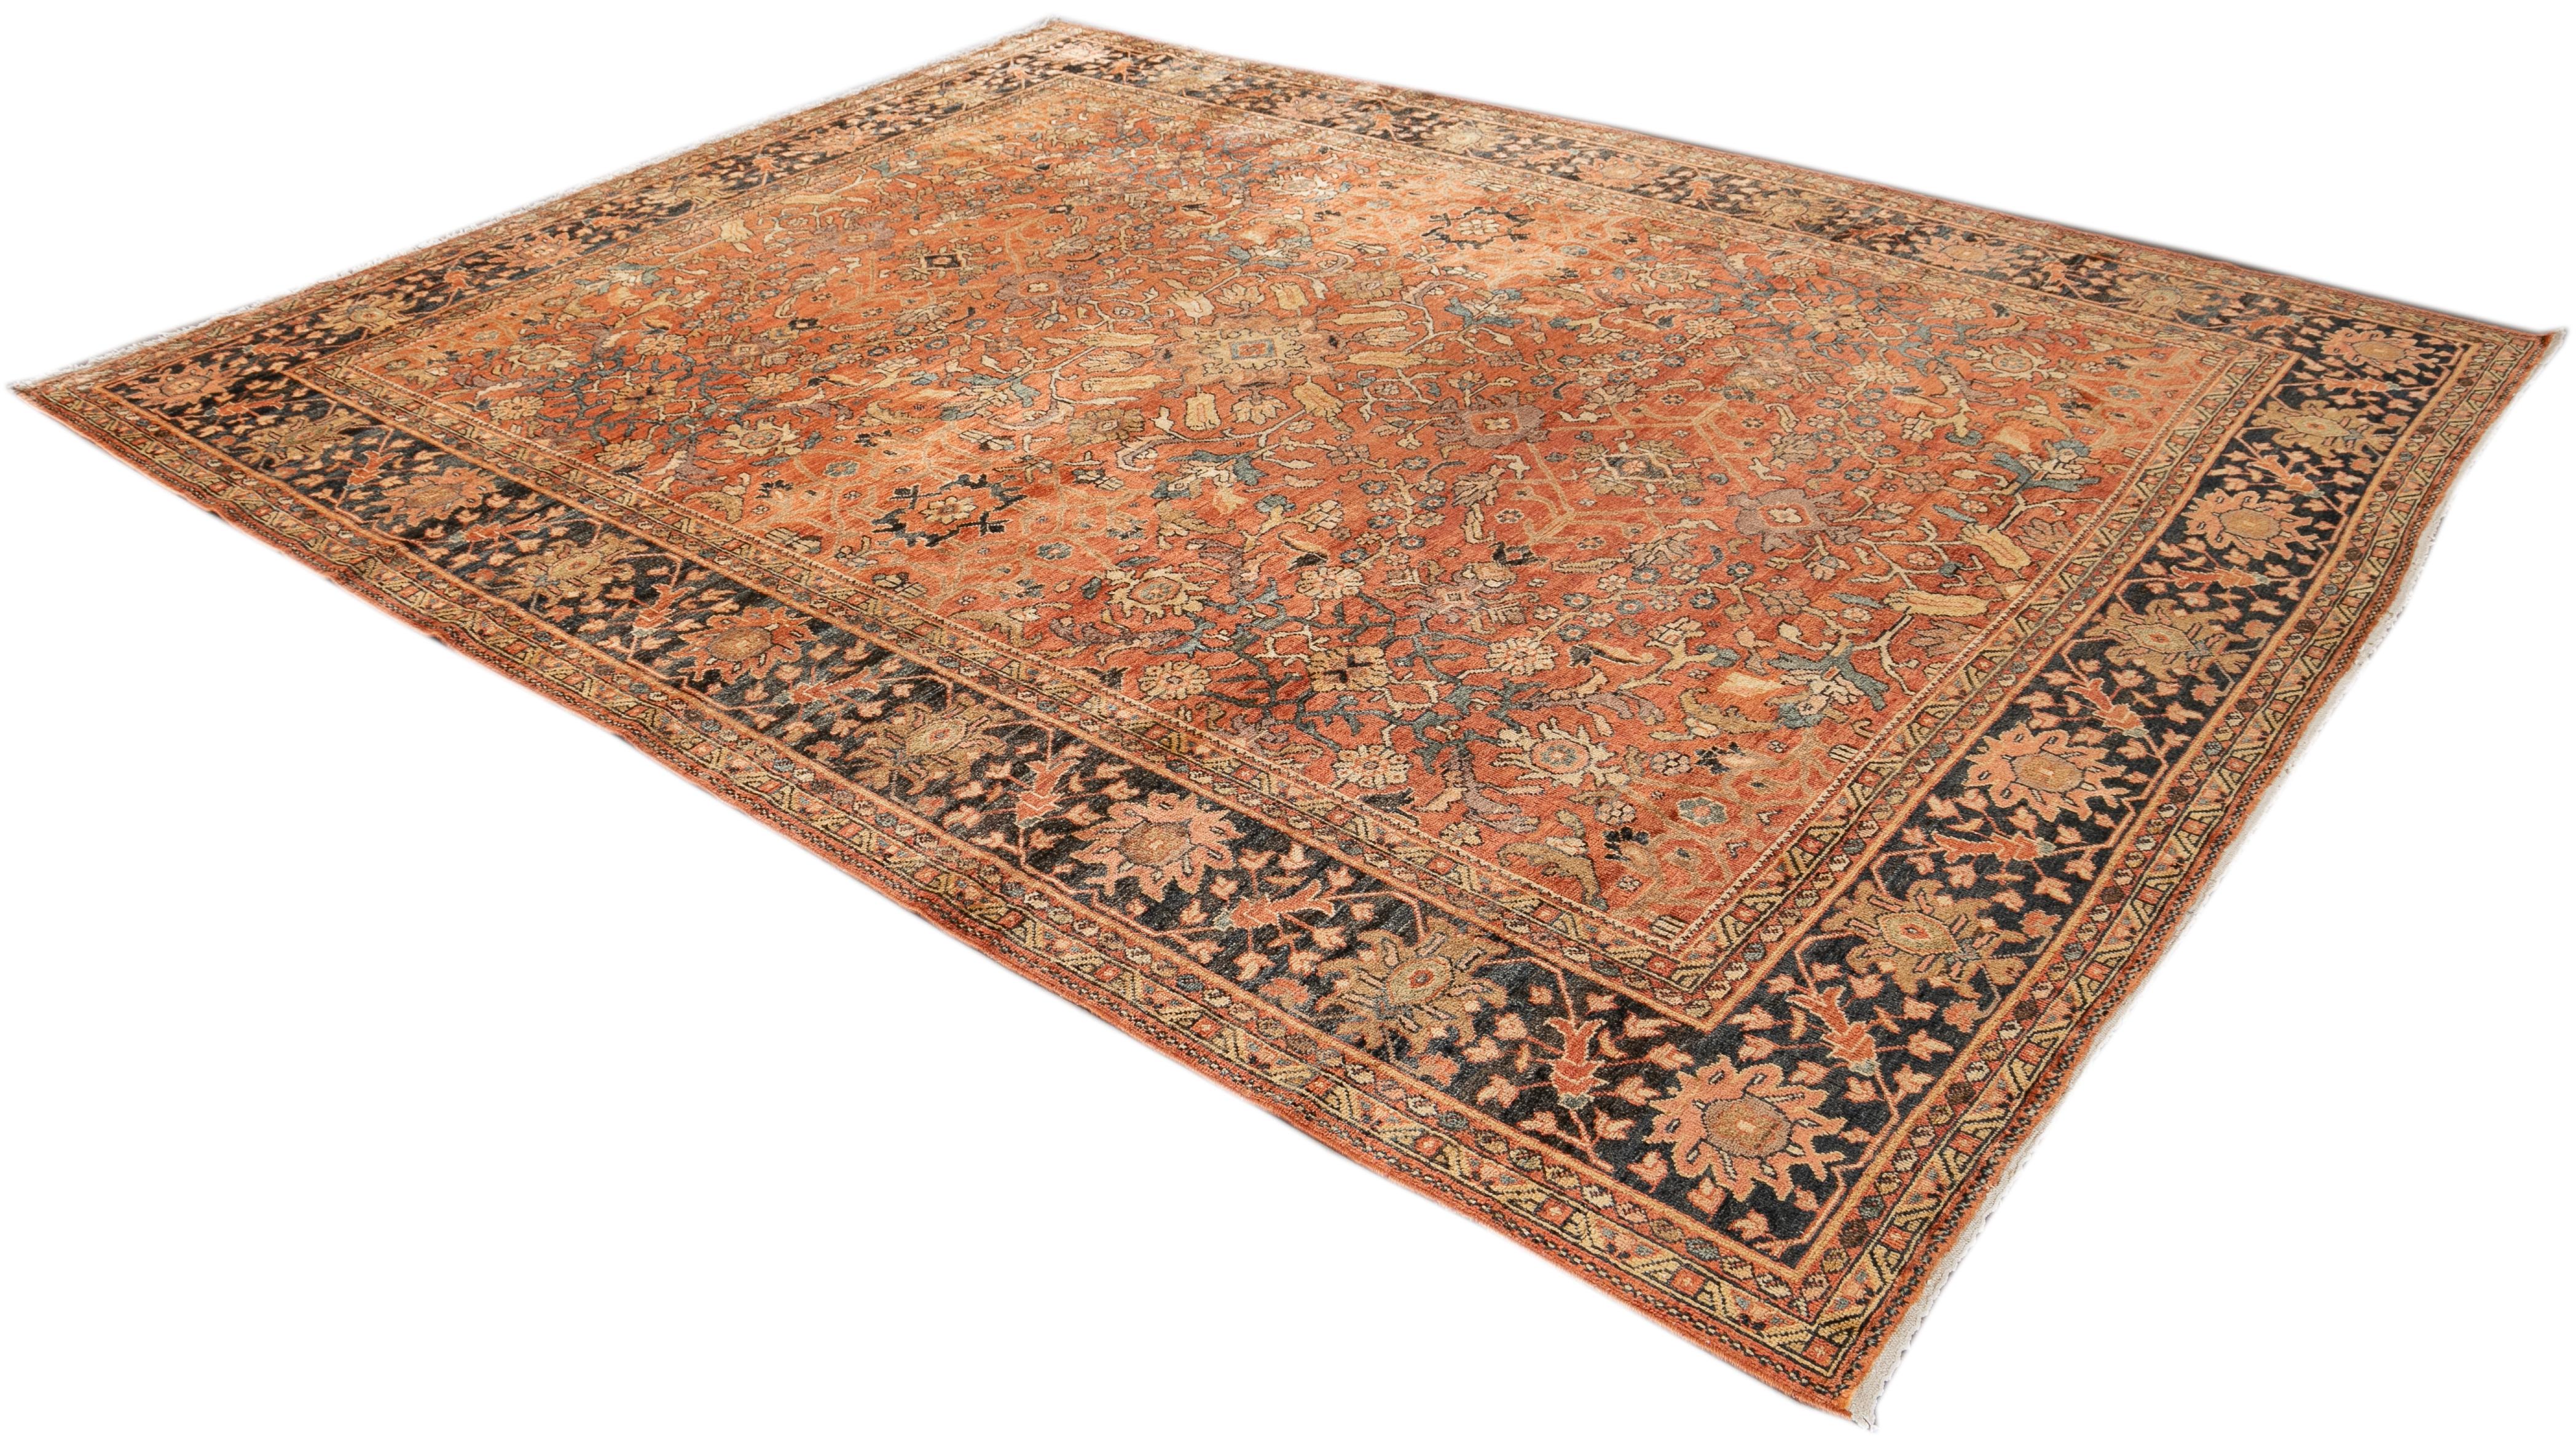 Early 20th Century Antique Mahal Wool Rug 4